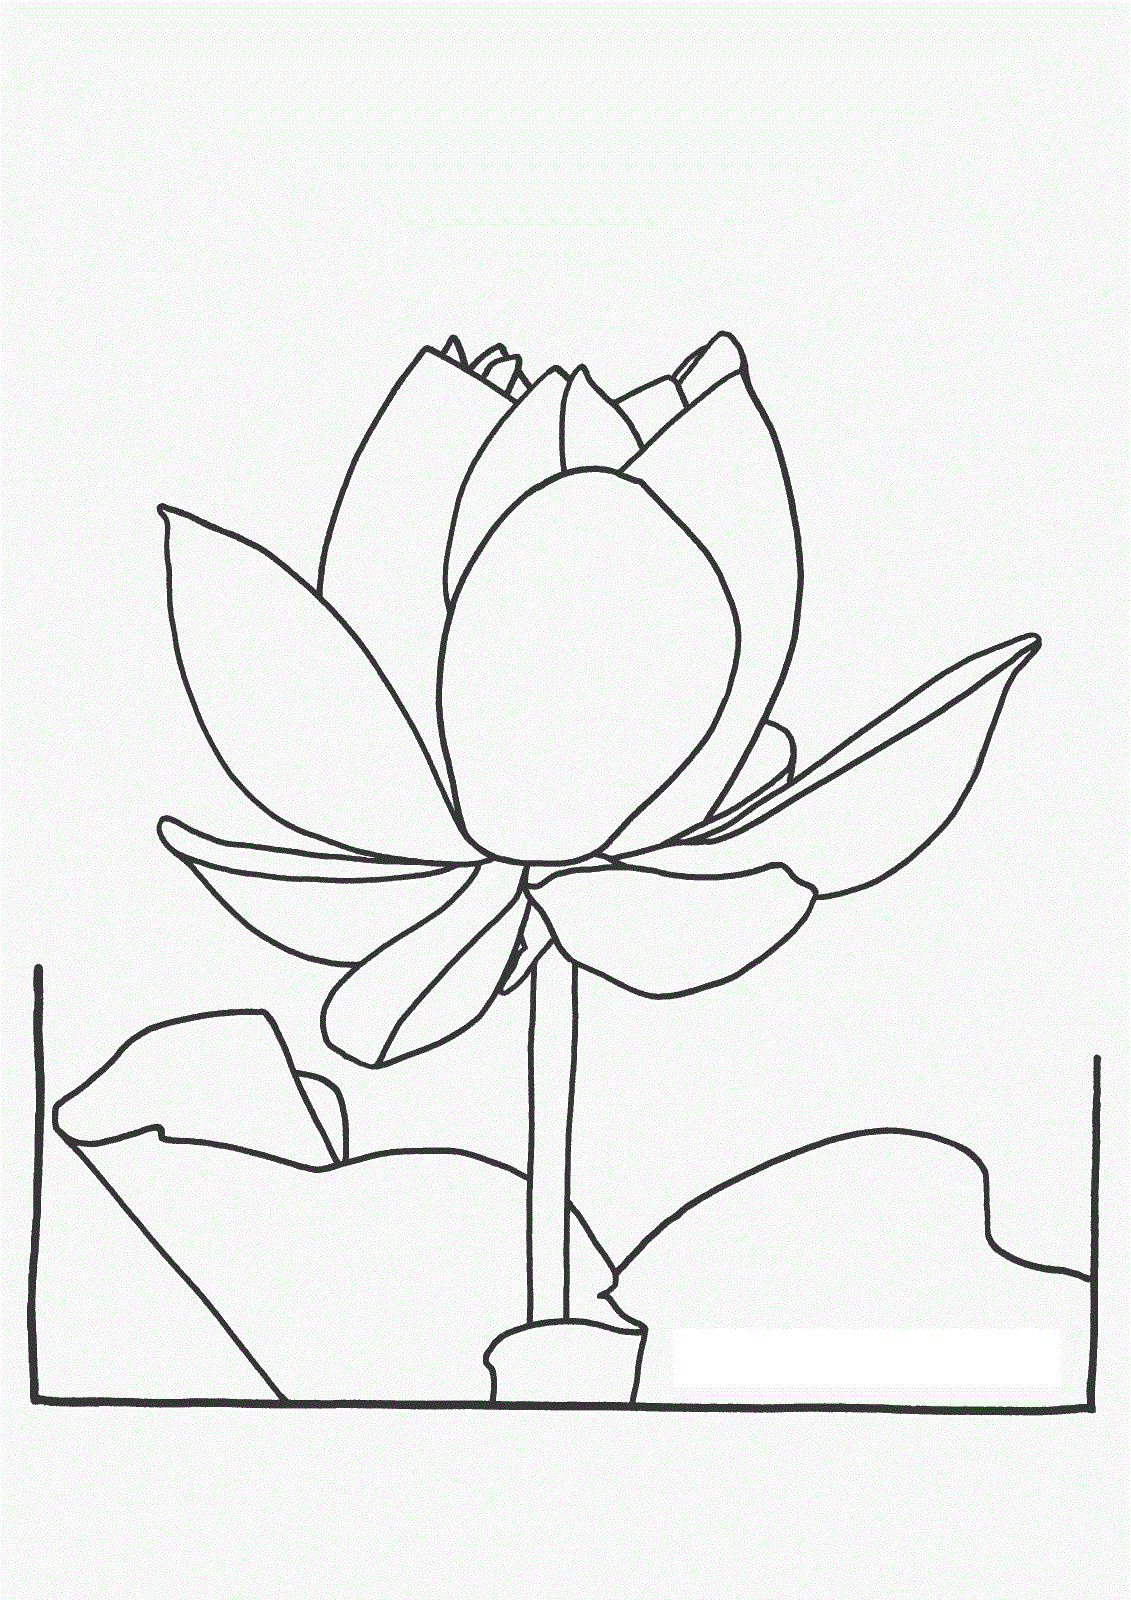 New Lotus Flower For Children Coloring Page